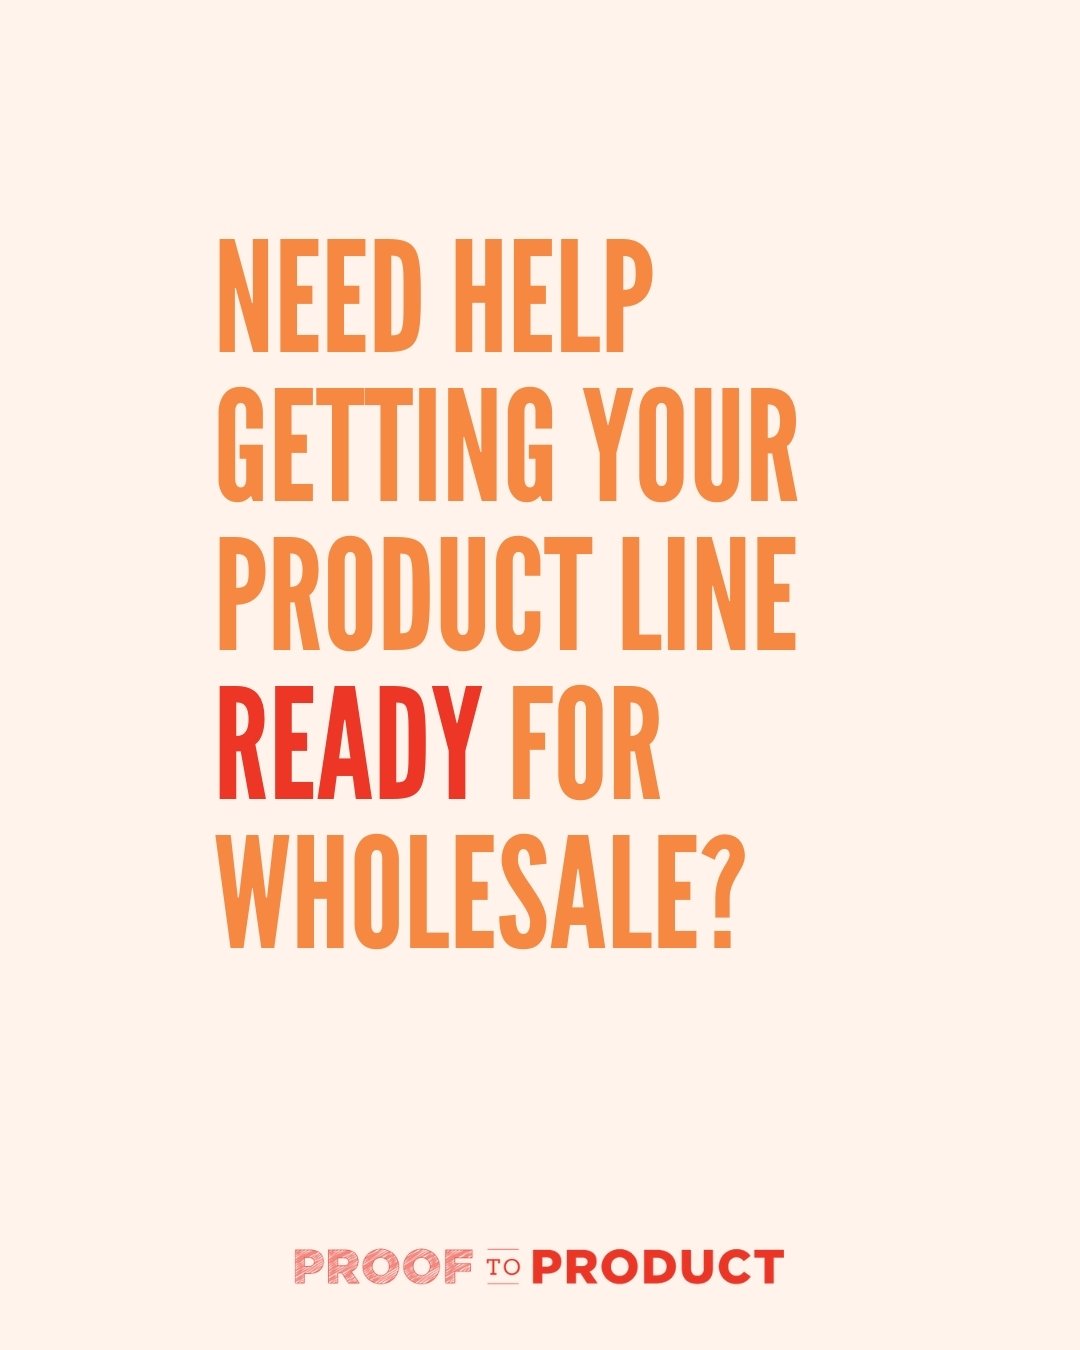 We've worked with over 28,000 brands to help them get their product line, their sales tools and their marketing ready to scale wholesale.

If you need help comment READY and I'll send you info about my free wholesale audio series -- so you can avoid 